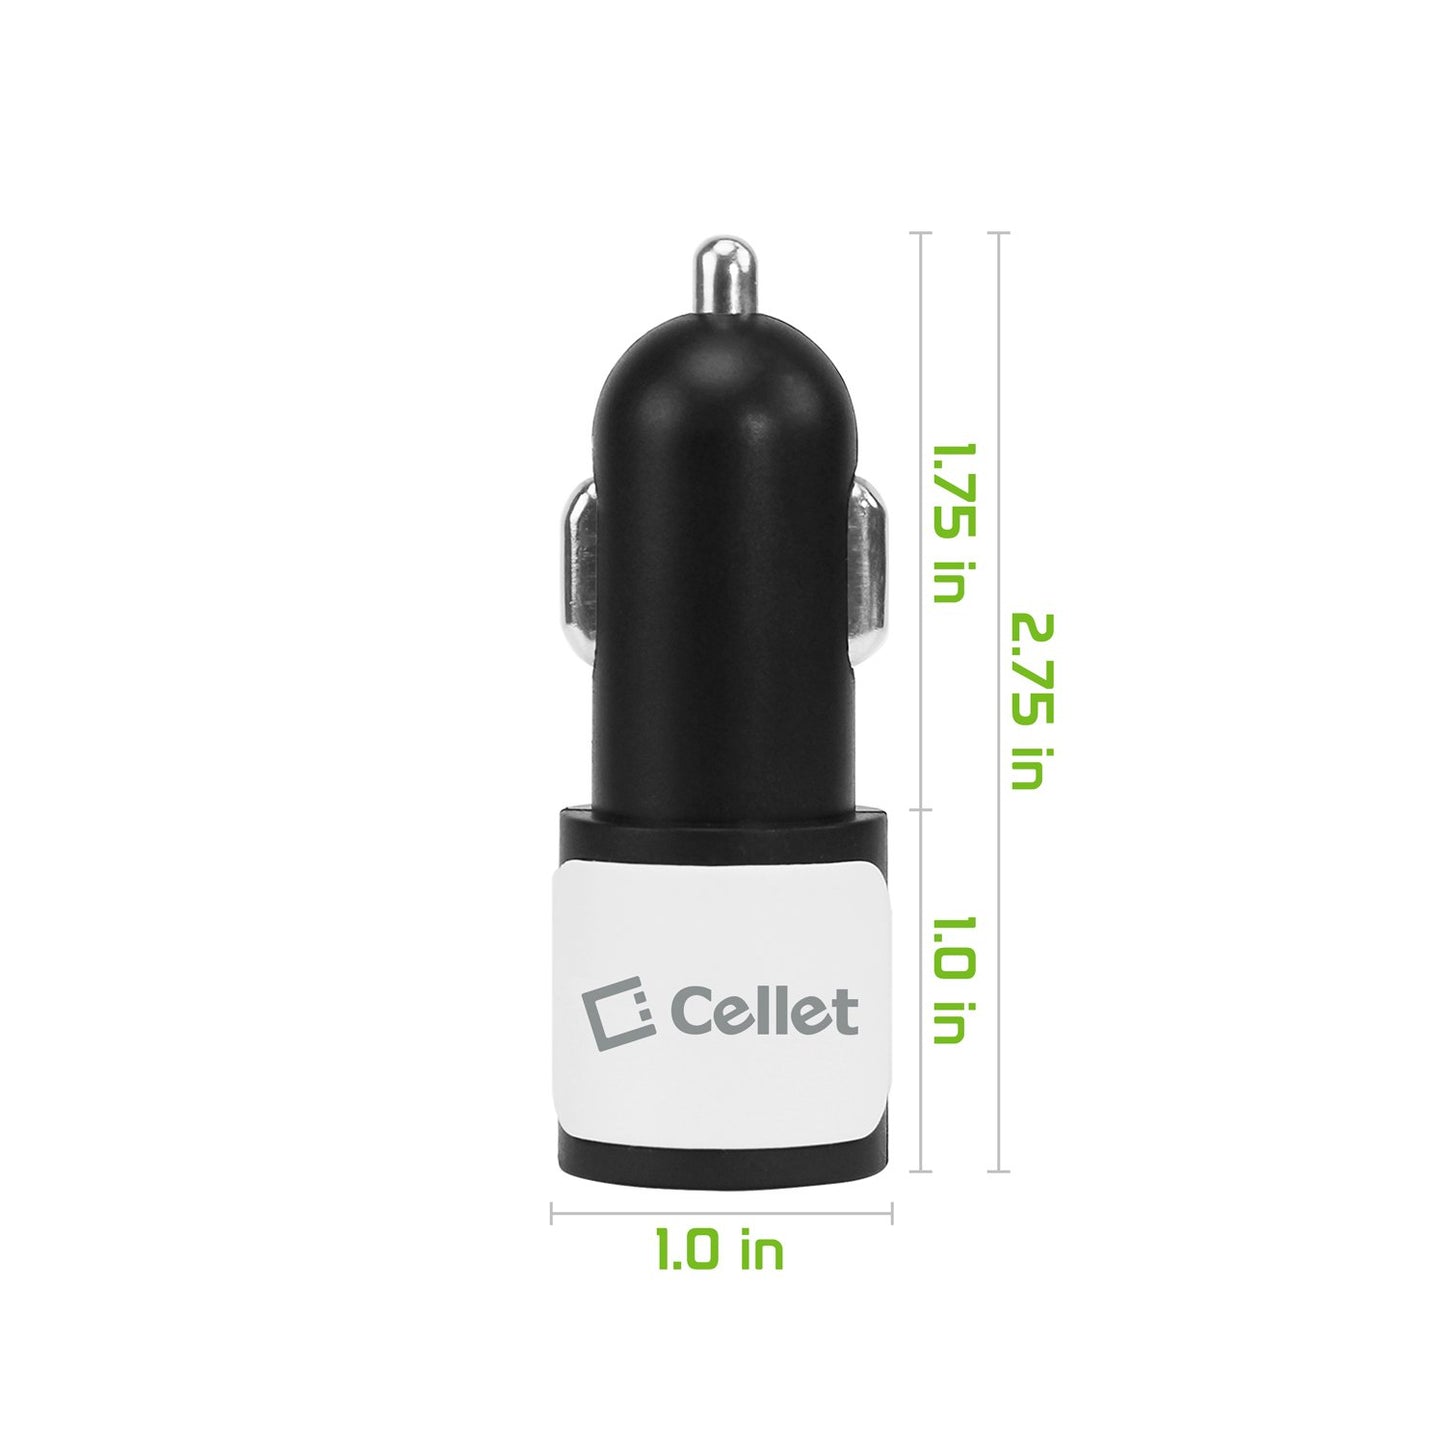 PUSB10W- Dual USB Car Charger, Cellet 10W Dual USB Car Charger (USB-C Cable Included) - White